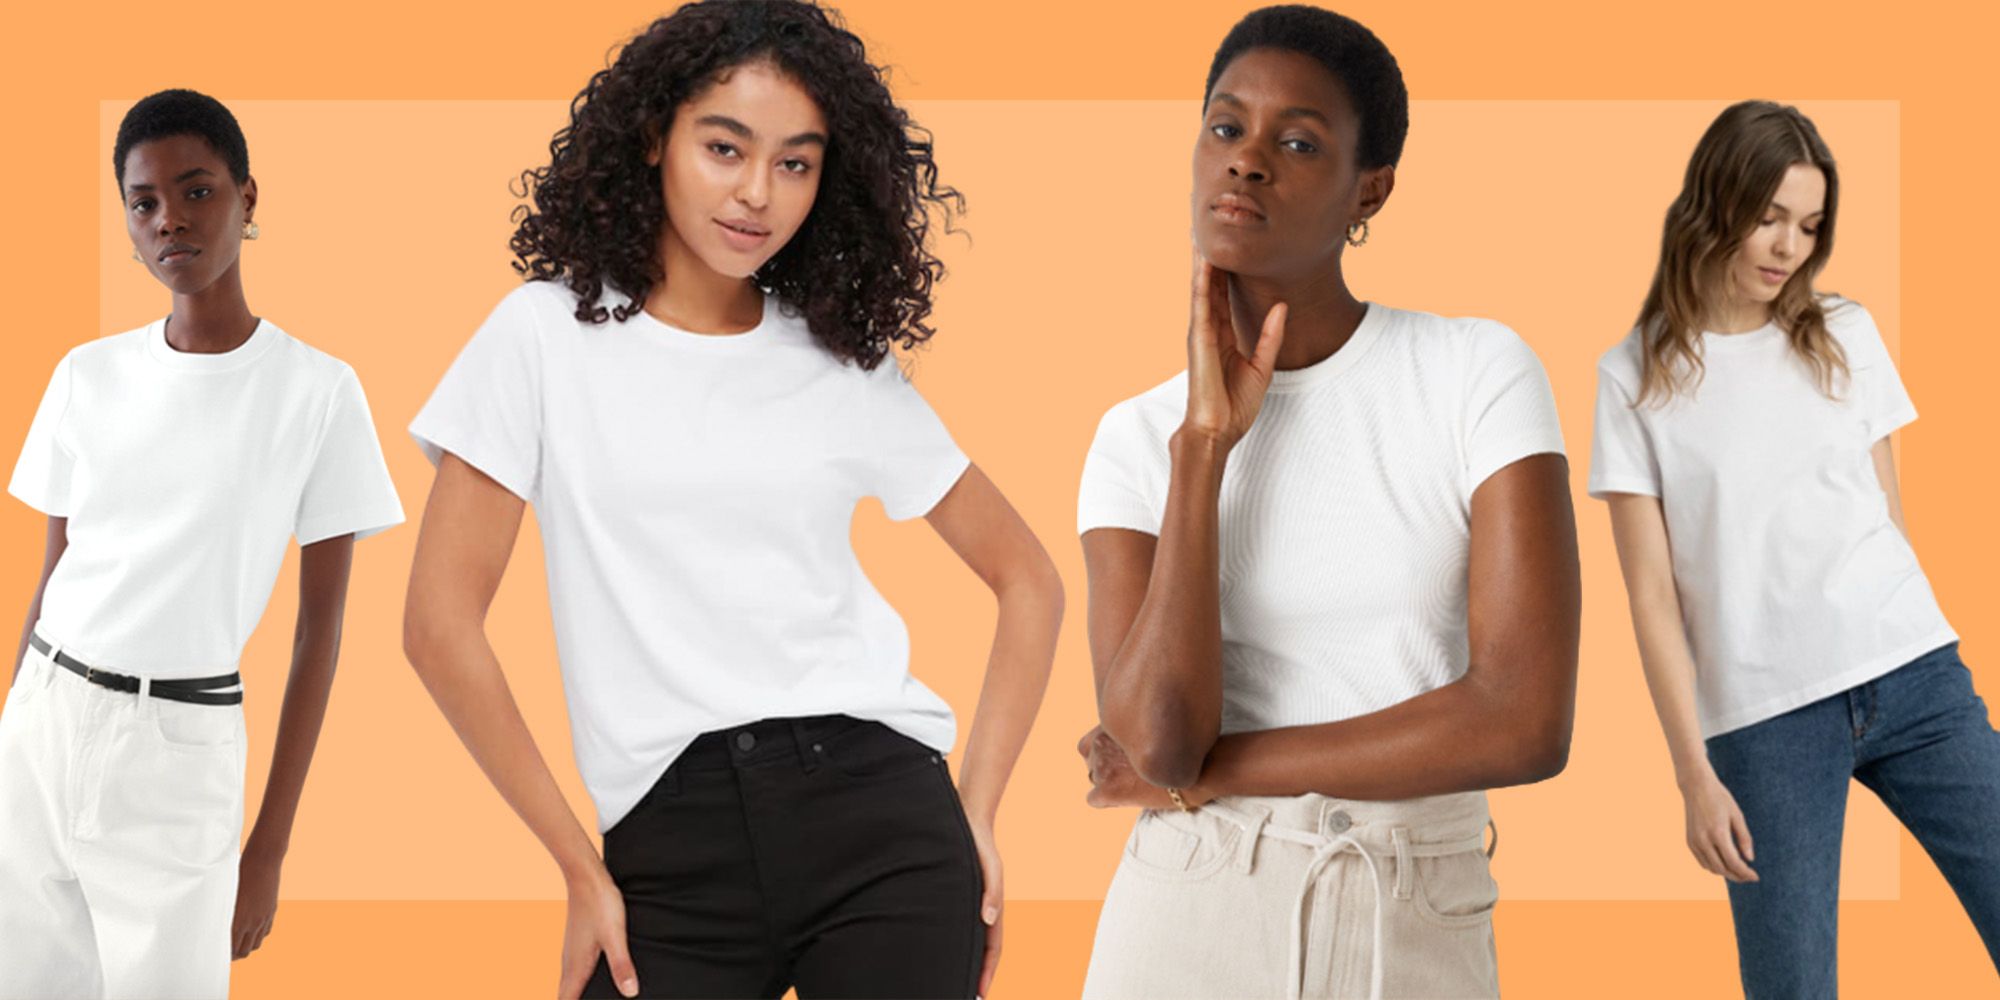 Reinventing women's shirts, meet With Nothing Underneath